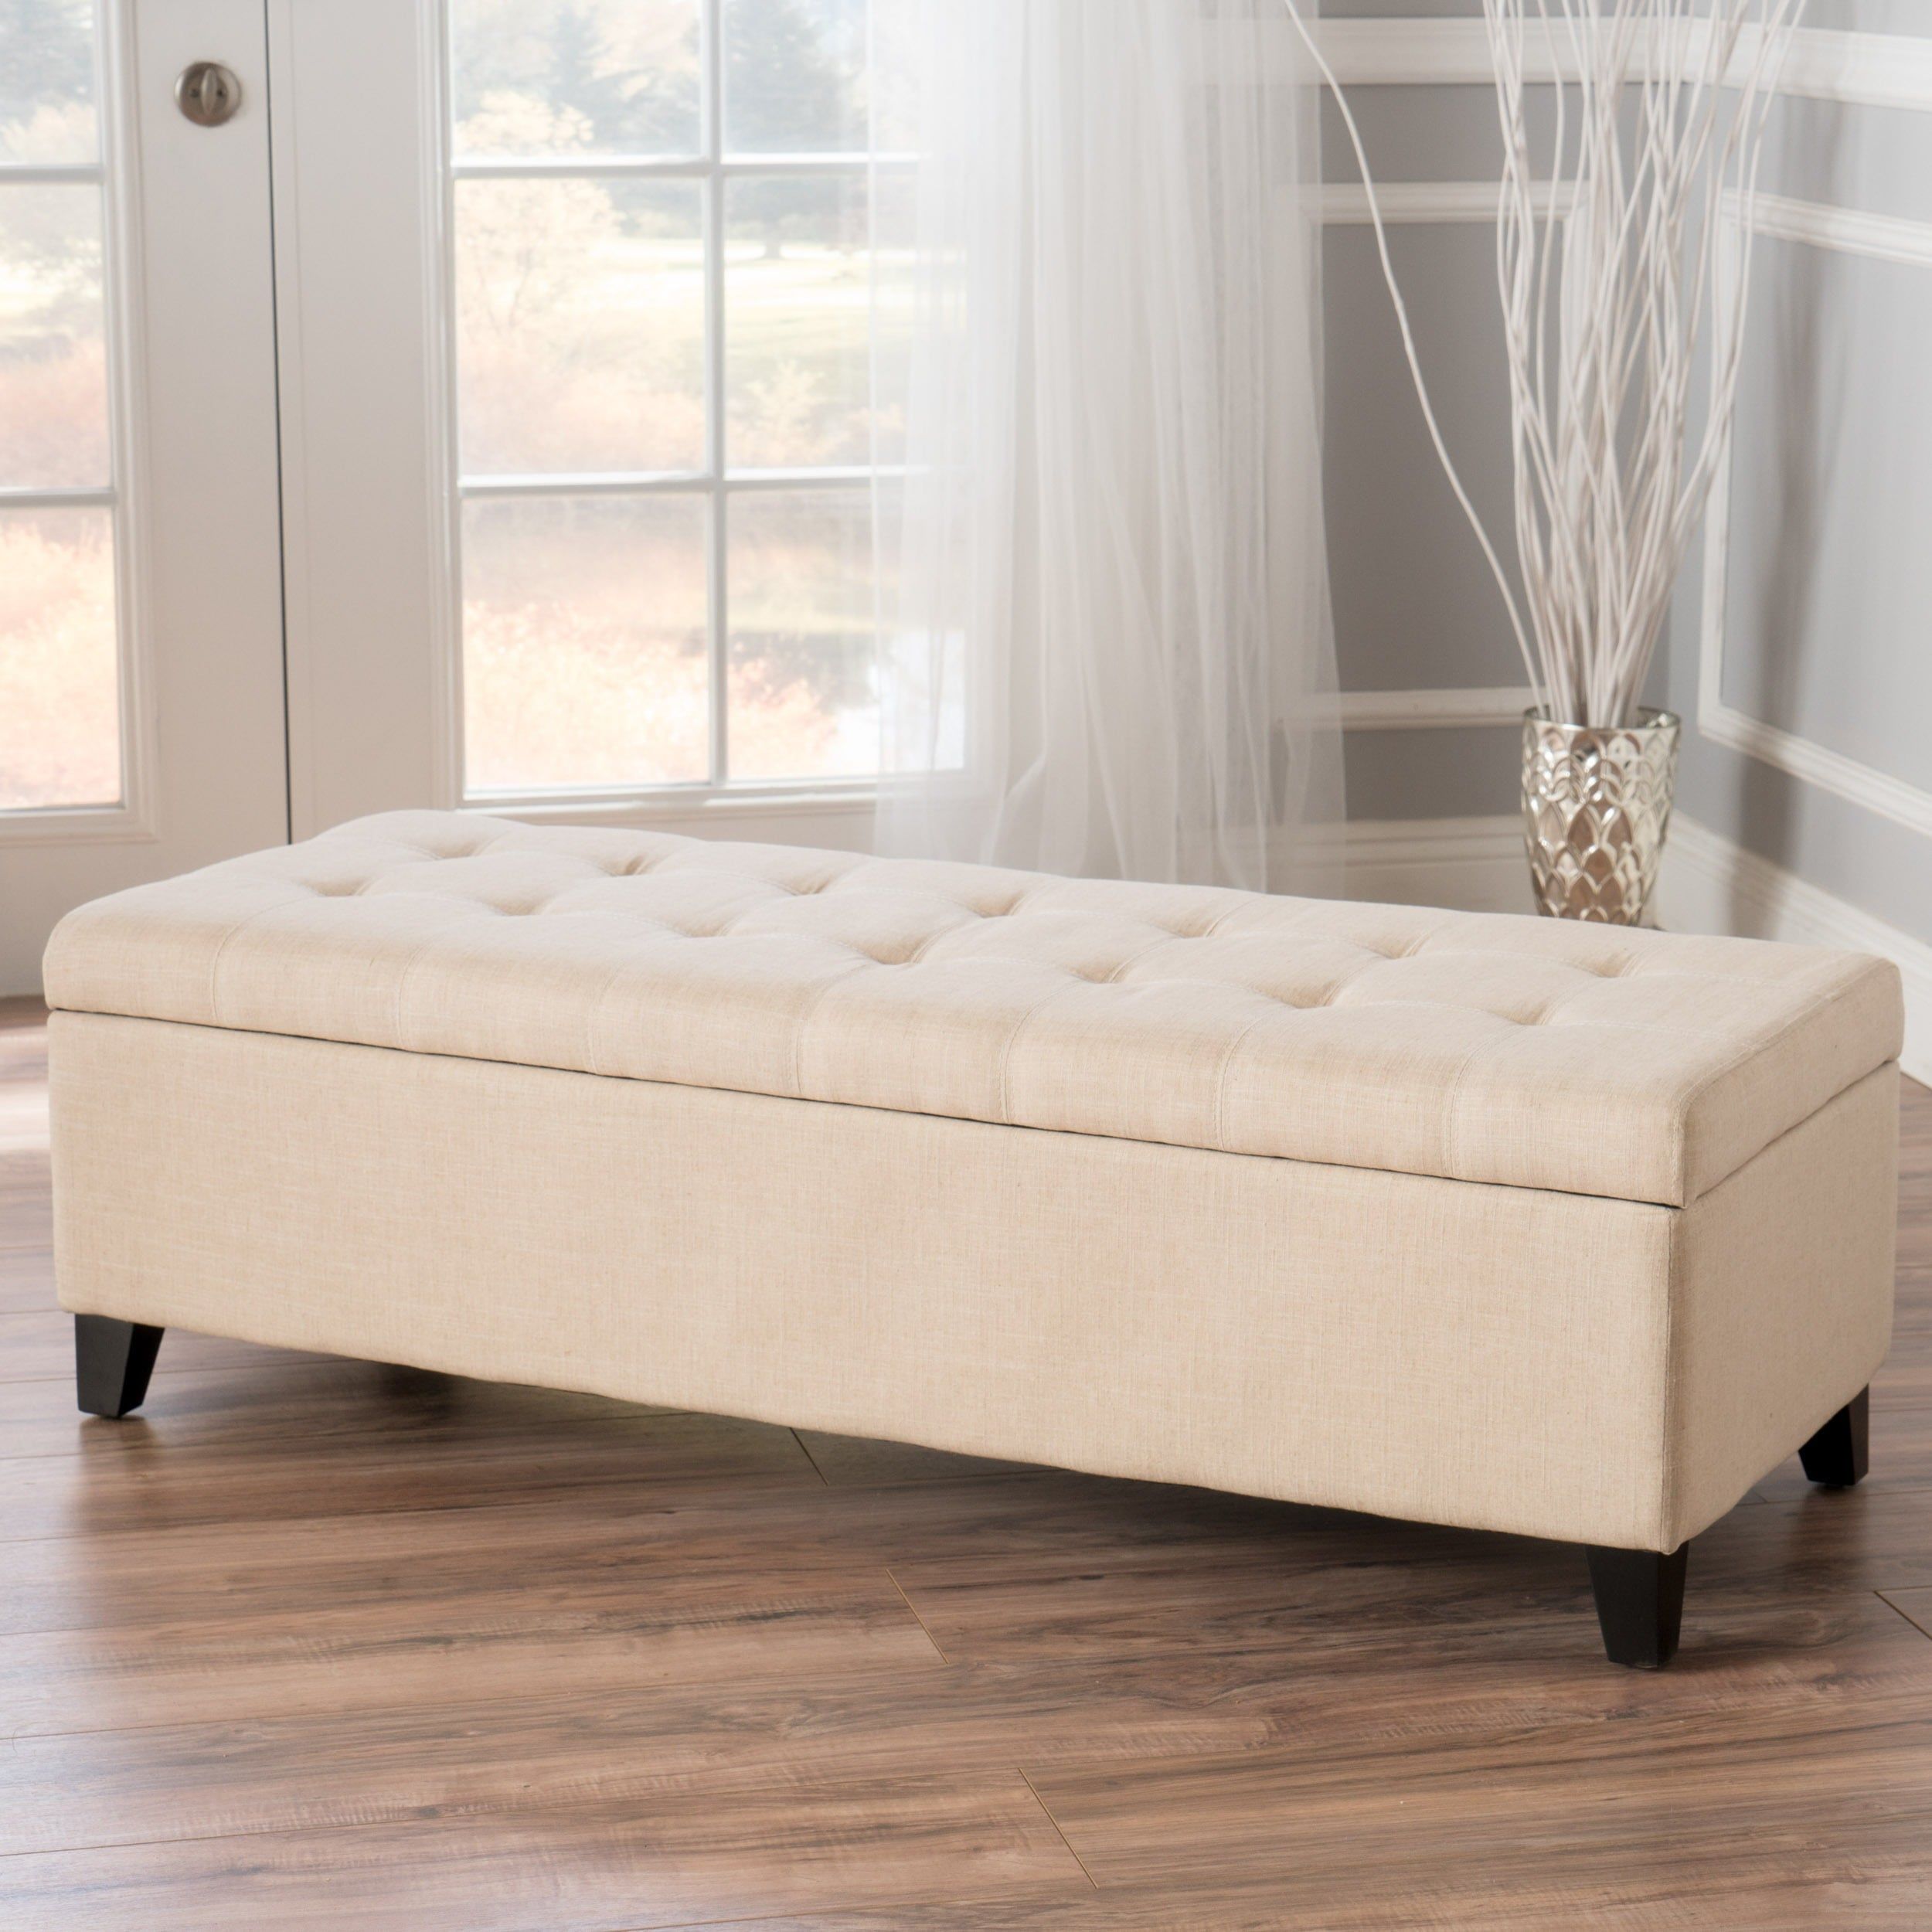 Mission Tufted Fabric Storage Ottoman Benchchristopher Knight Home For Tufted Fabric Ottomans (View 7 of 20)